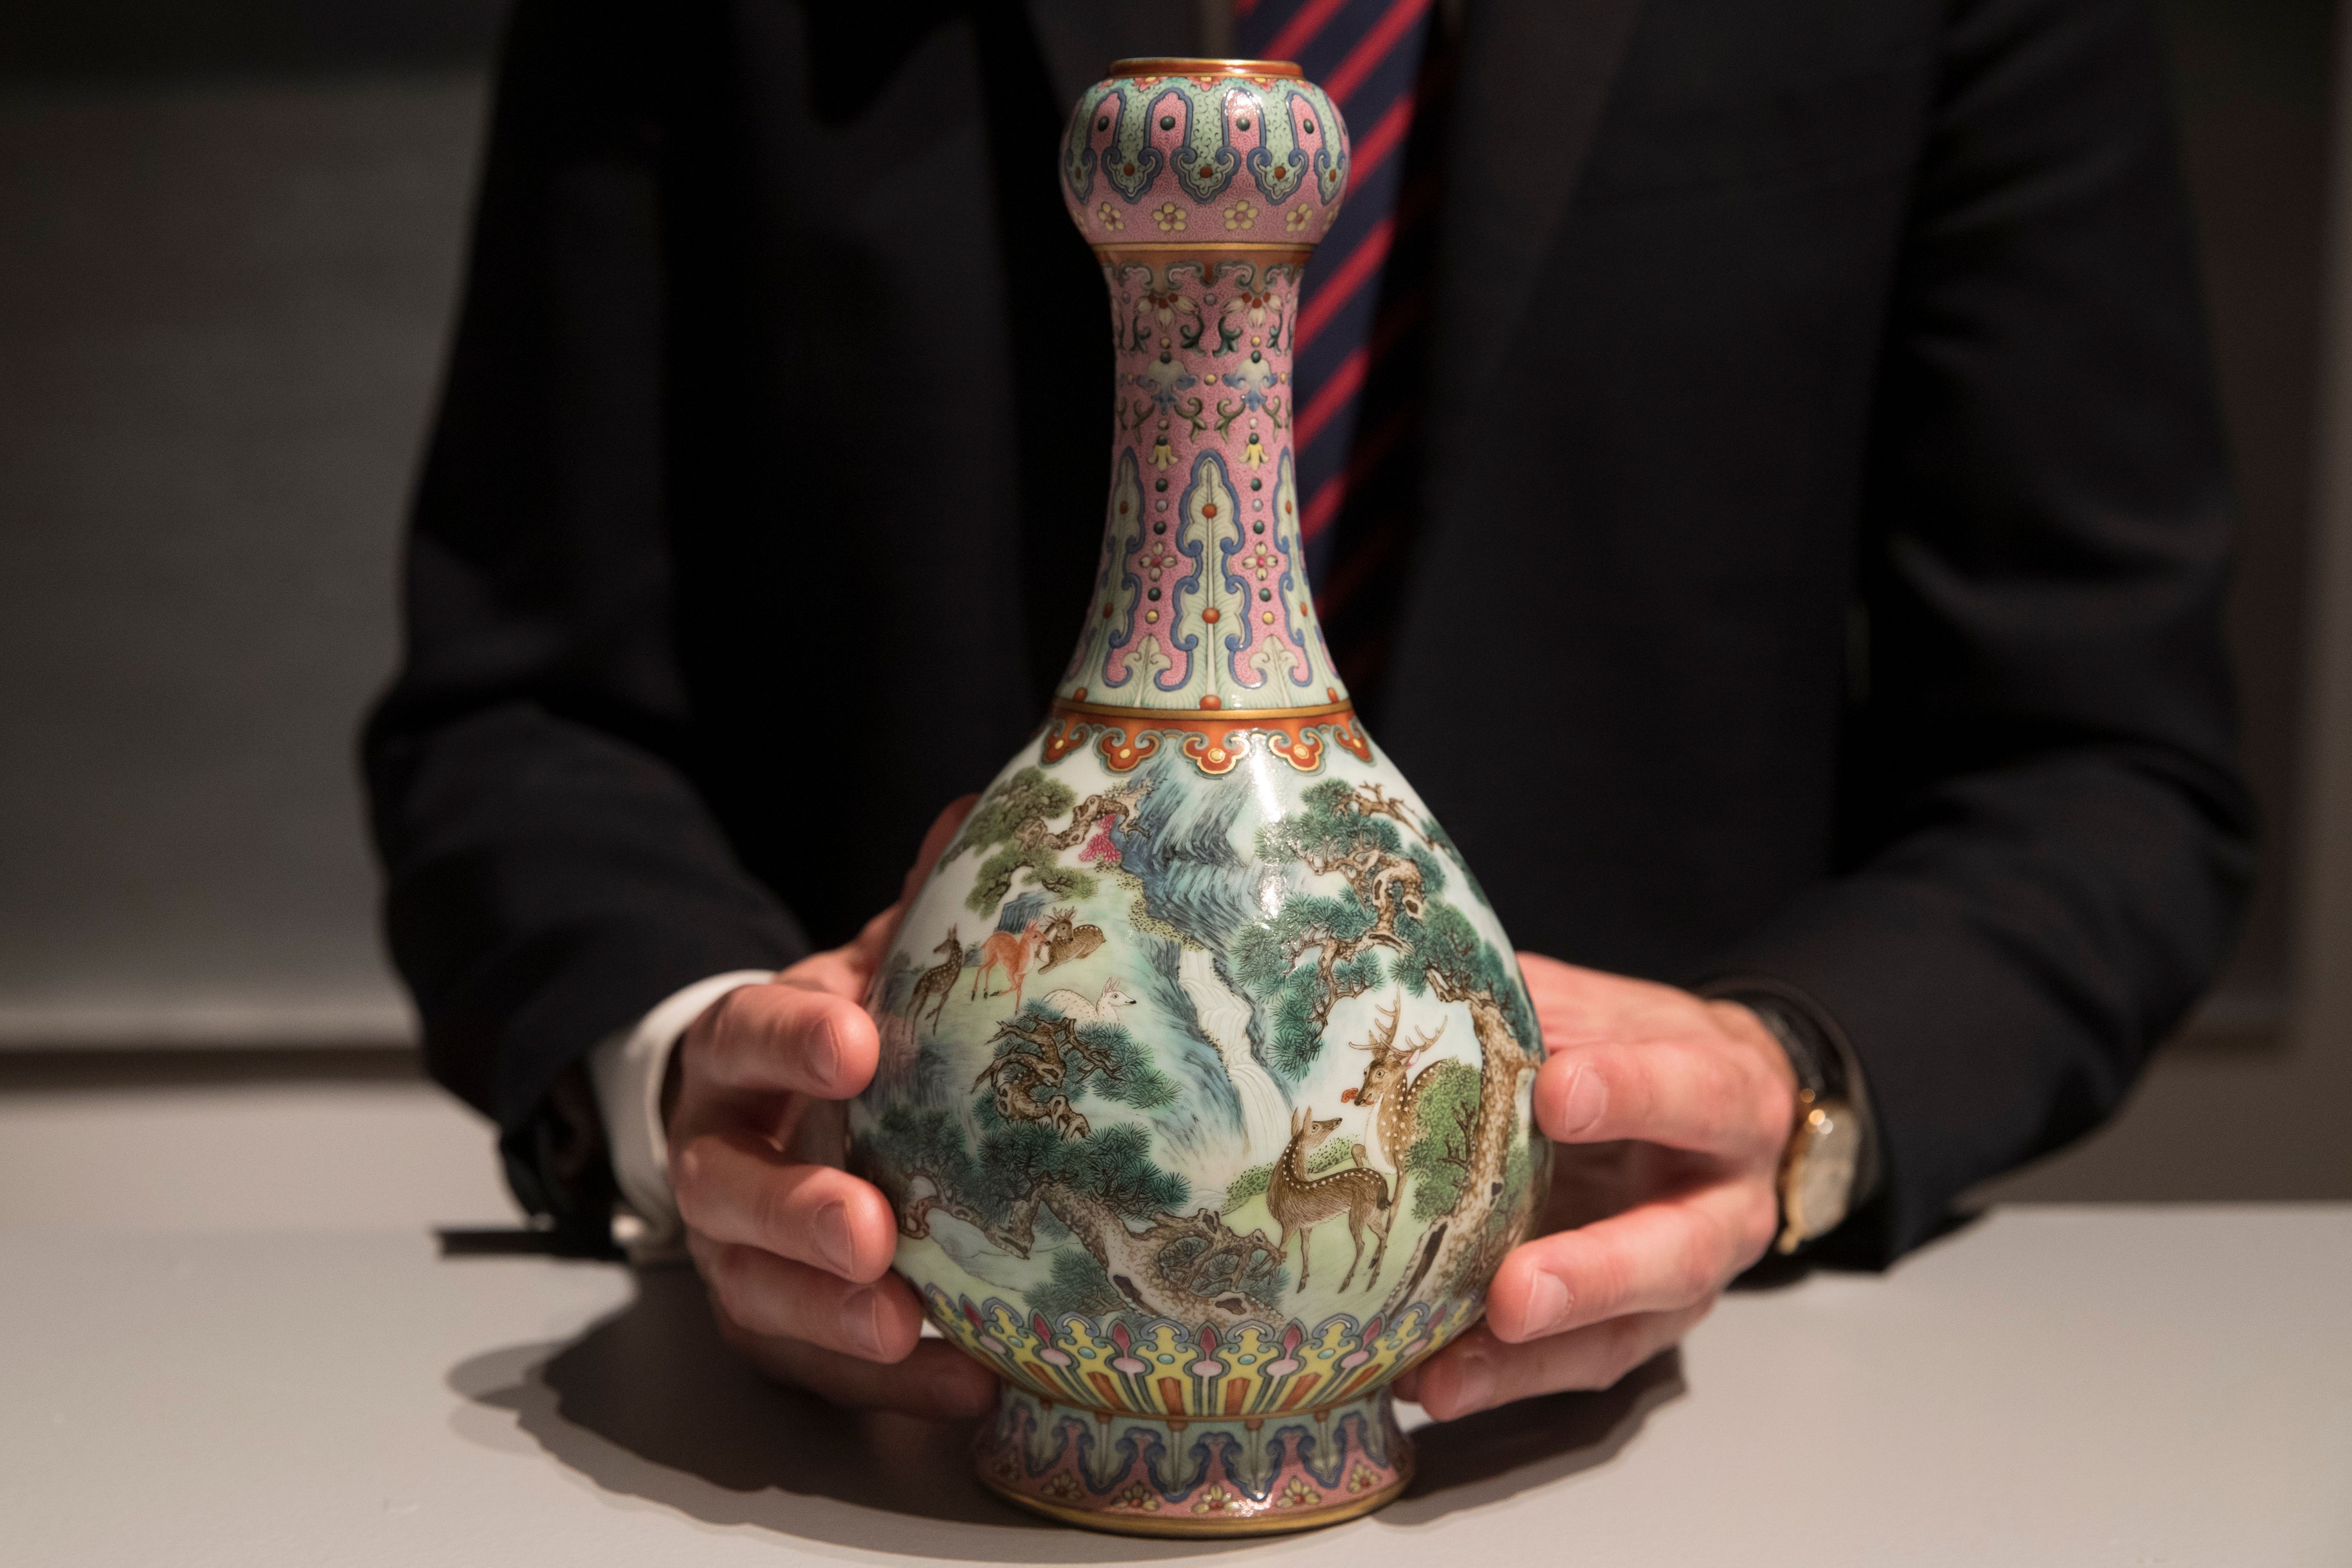 A Chinese Vase Found in an Attic Sells For $19 Million